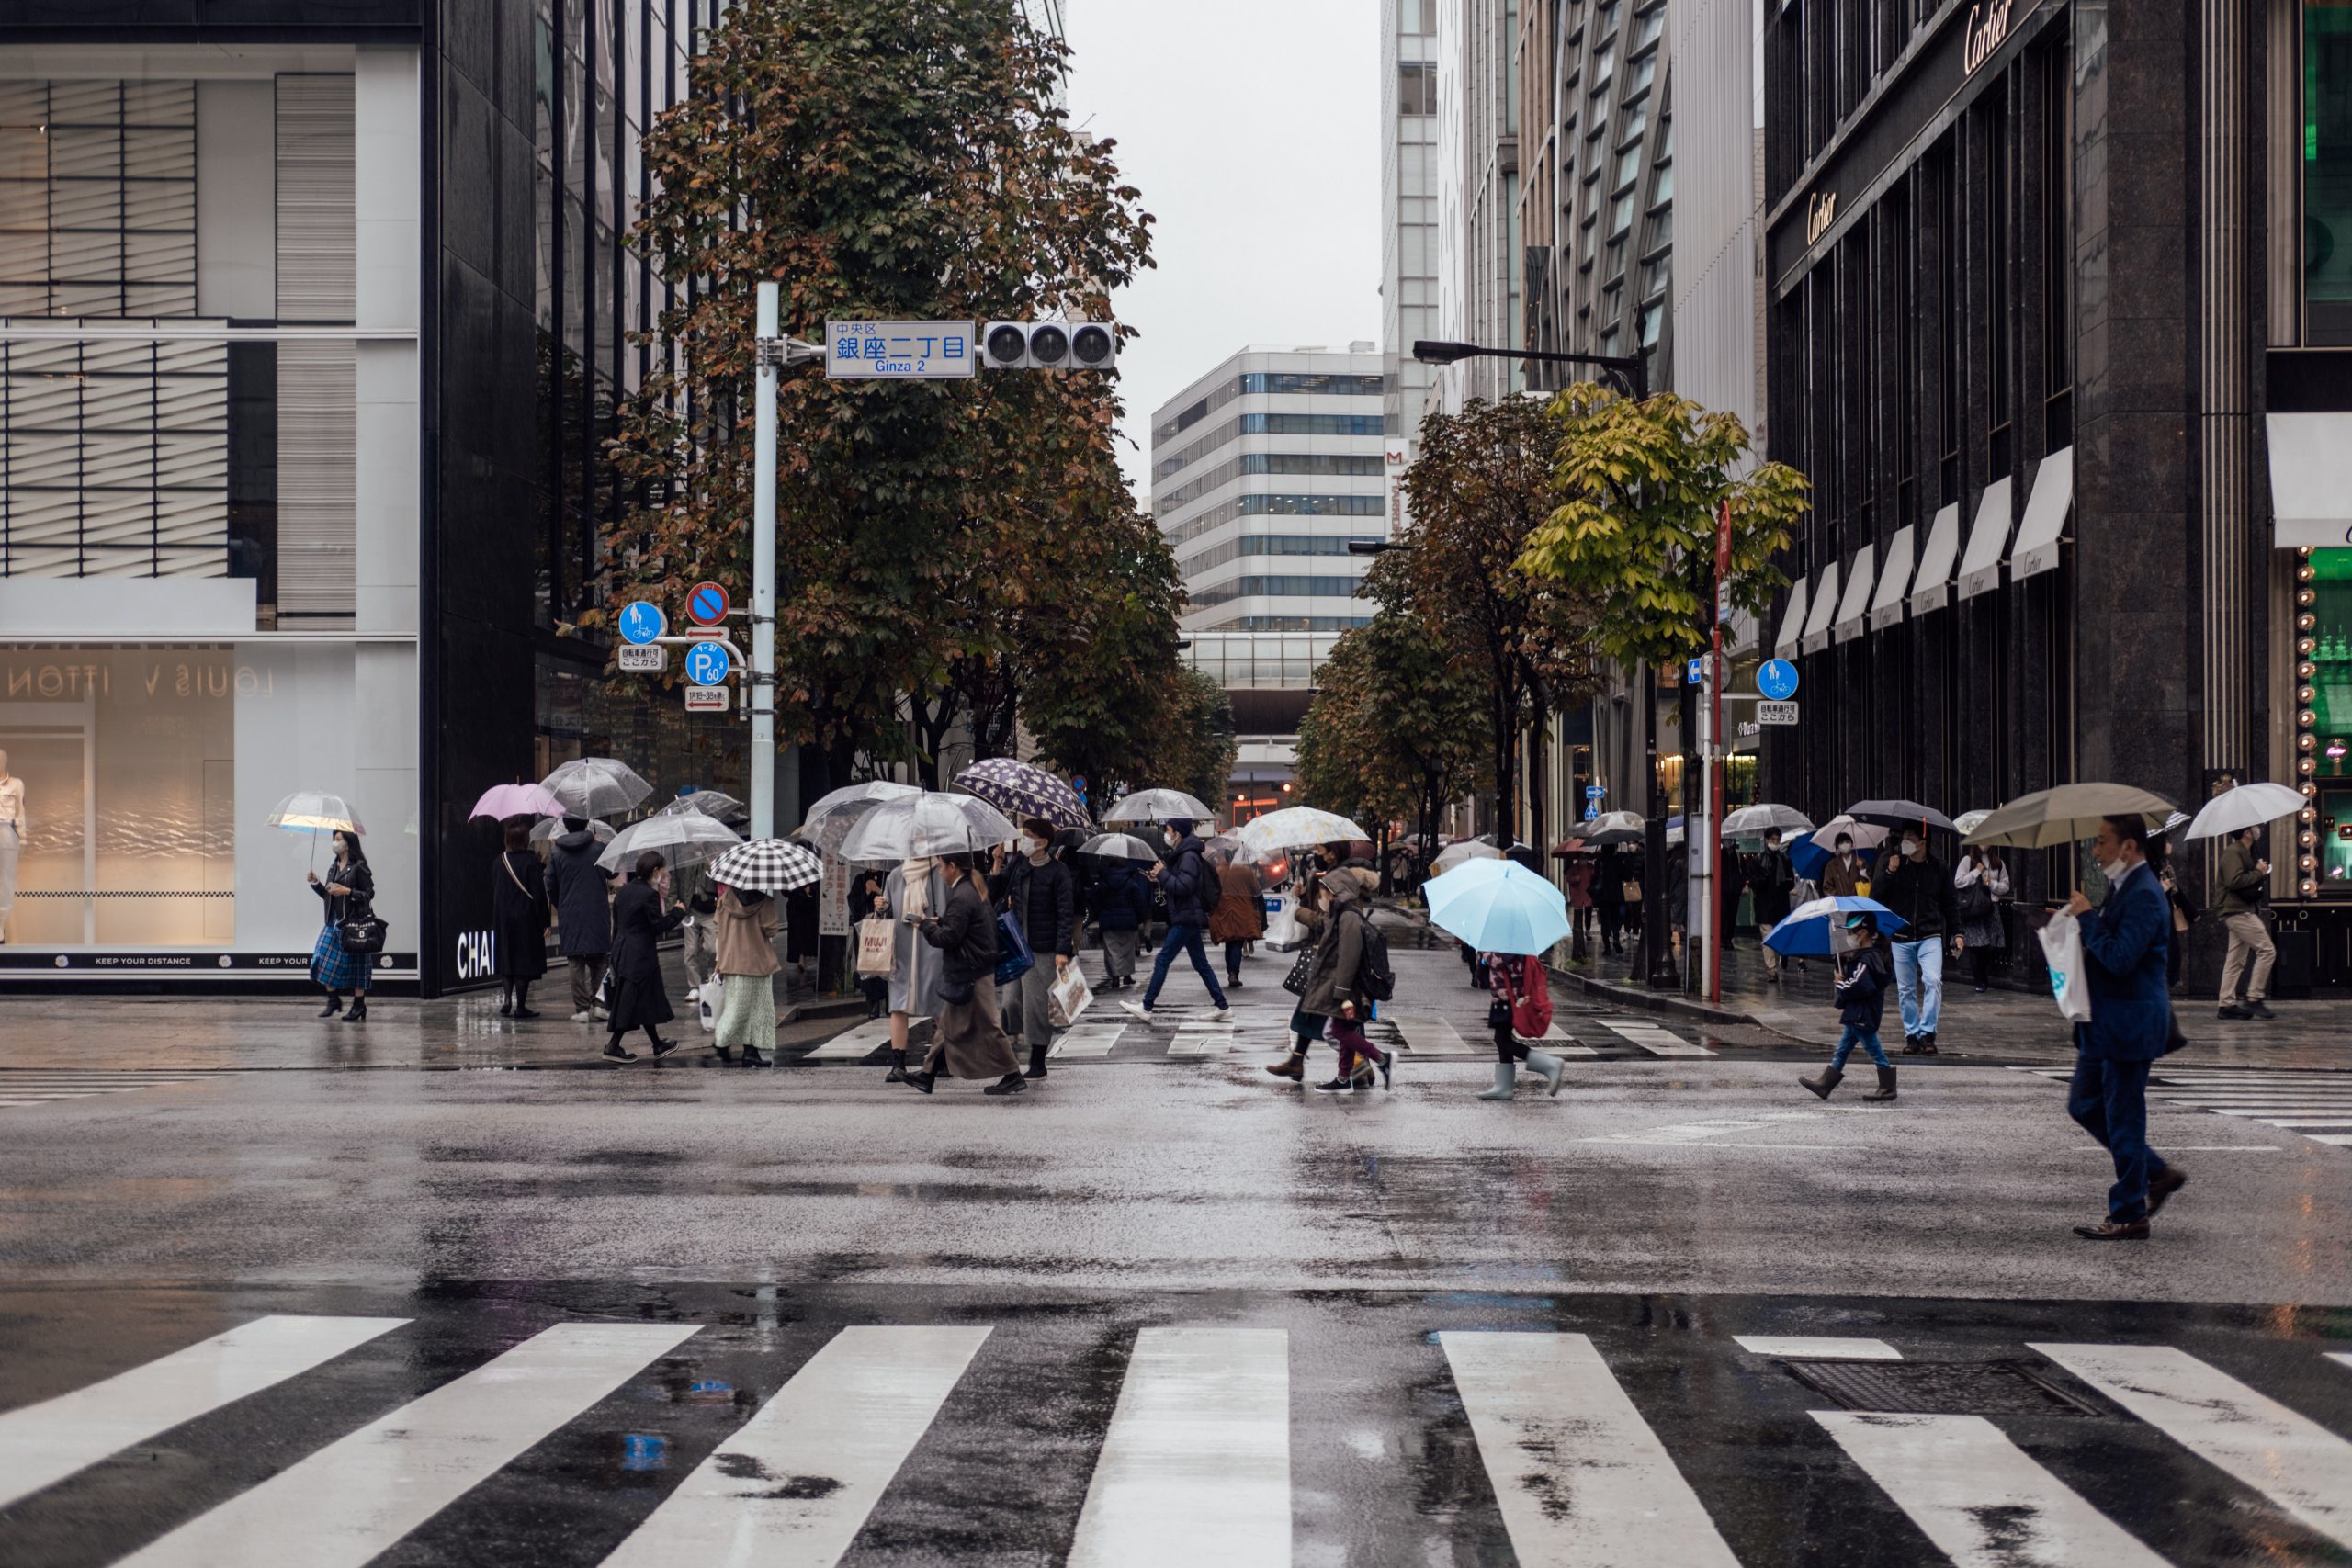 People crossing an intersection in Ginza